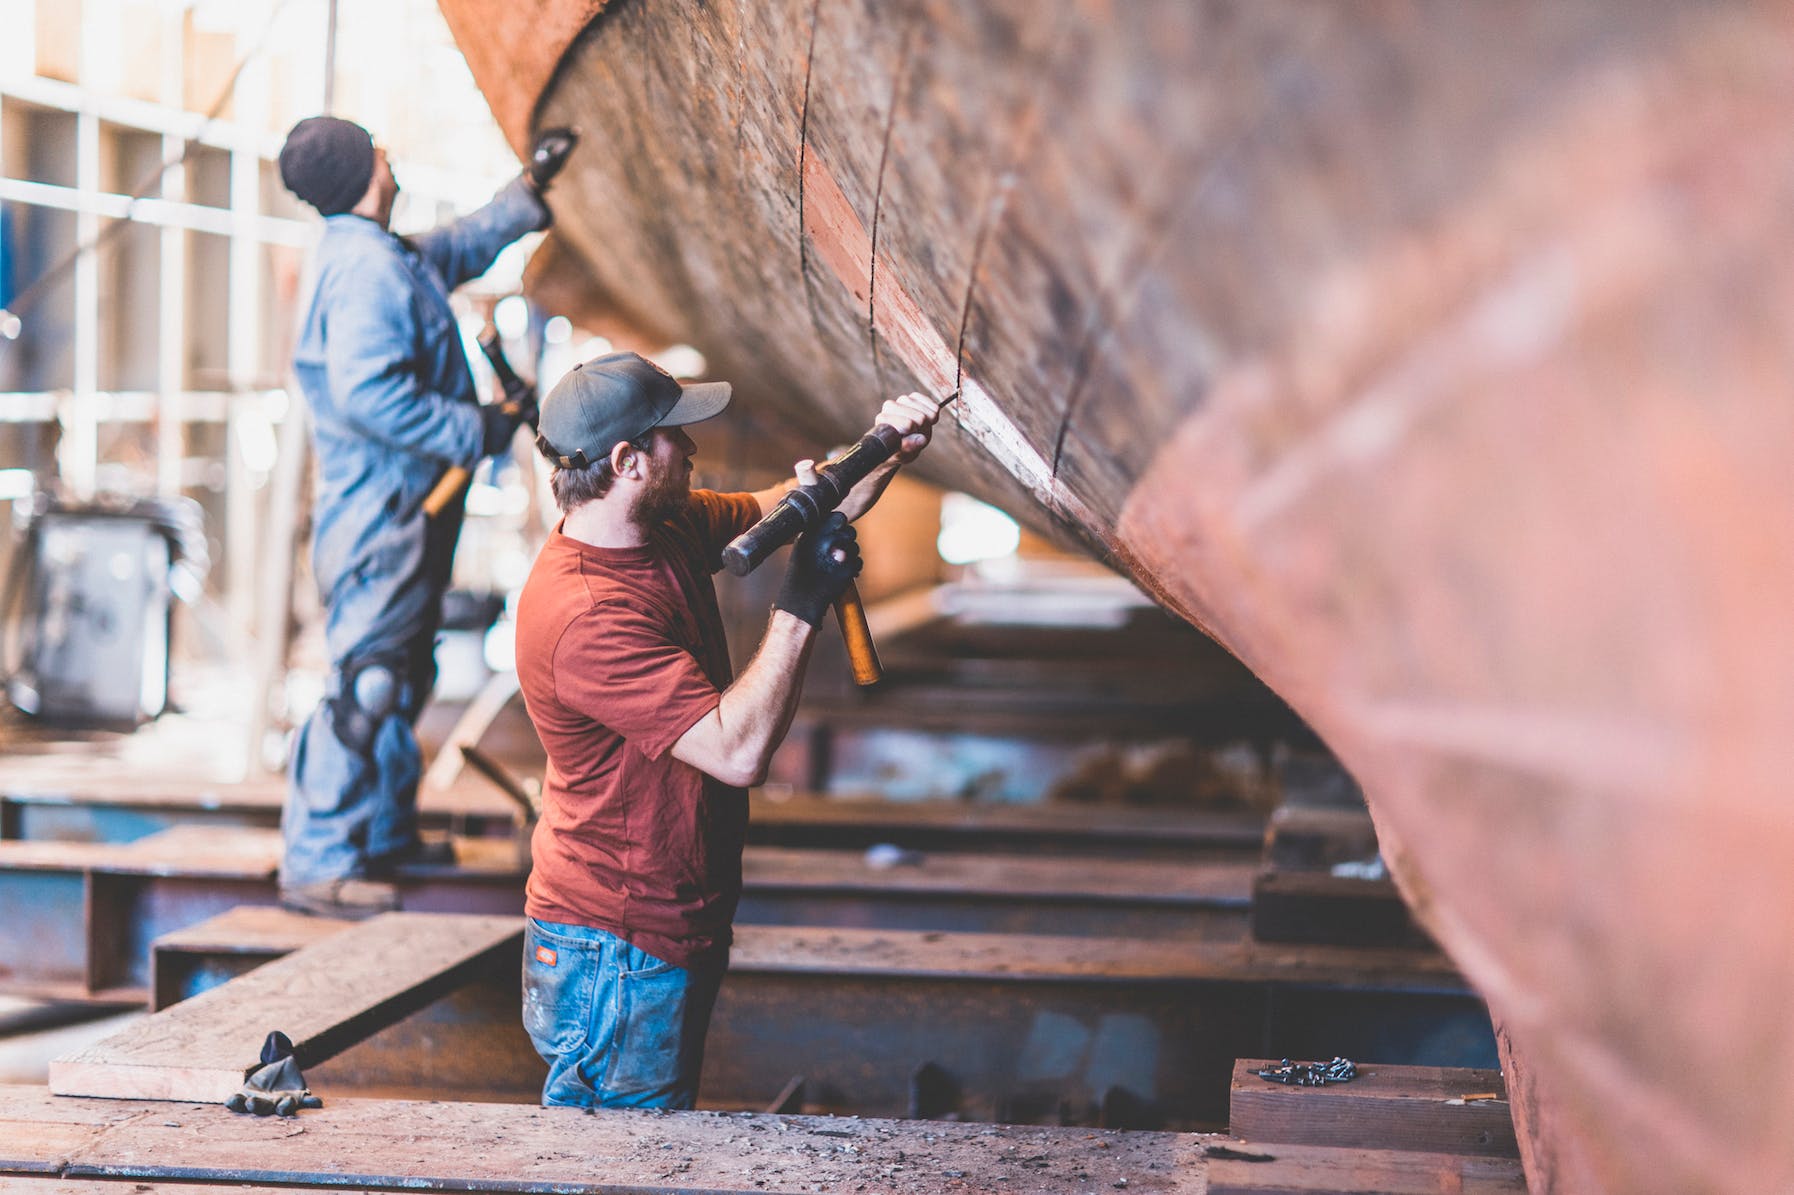 Men working on the exterior hull of a boat in a dry dock.